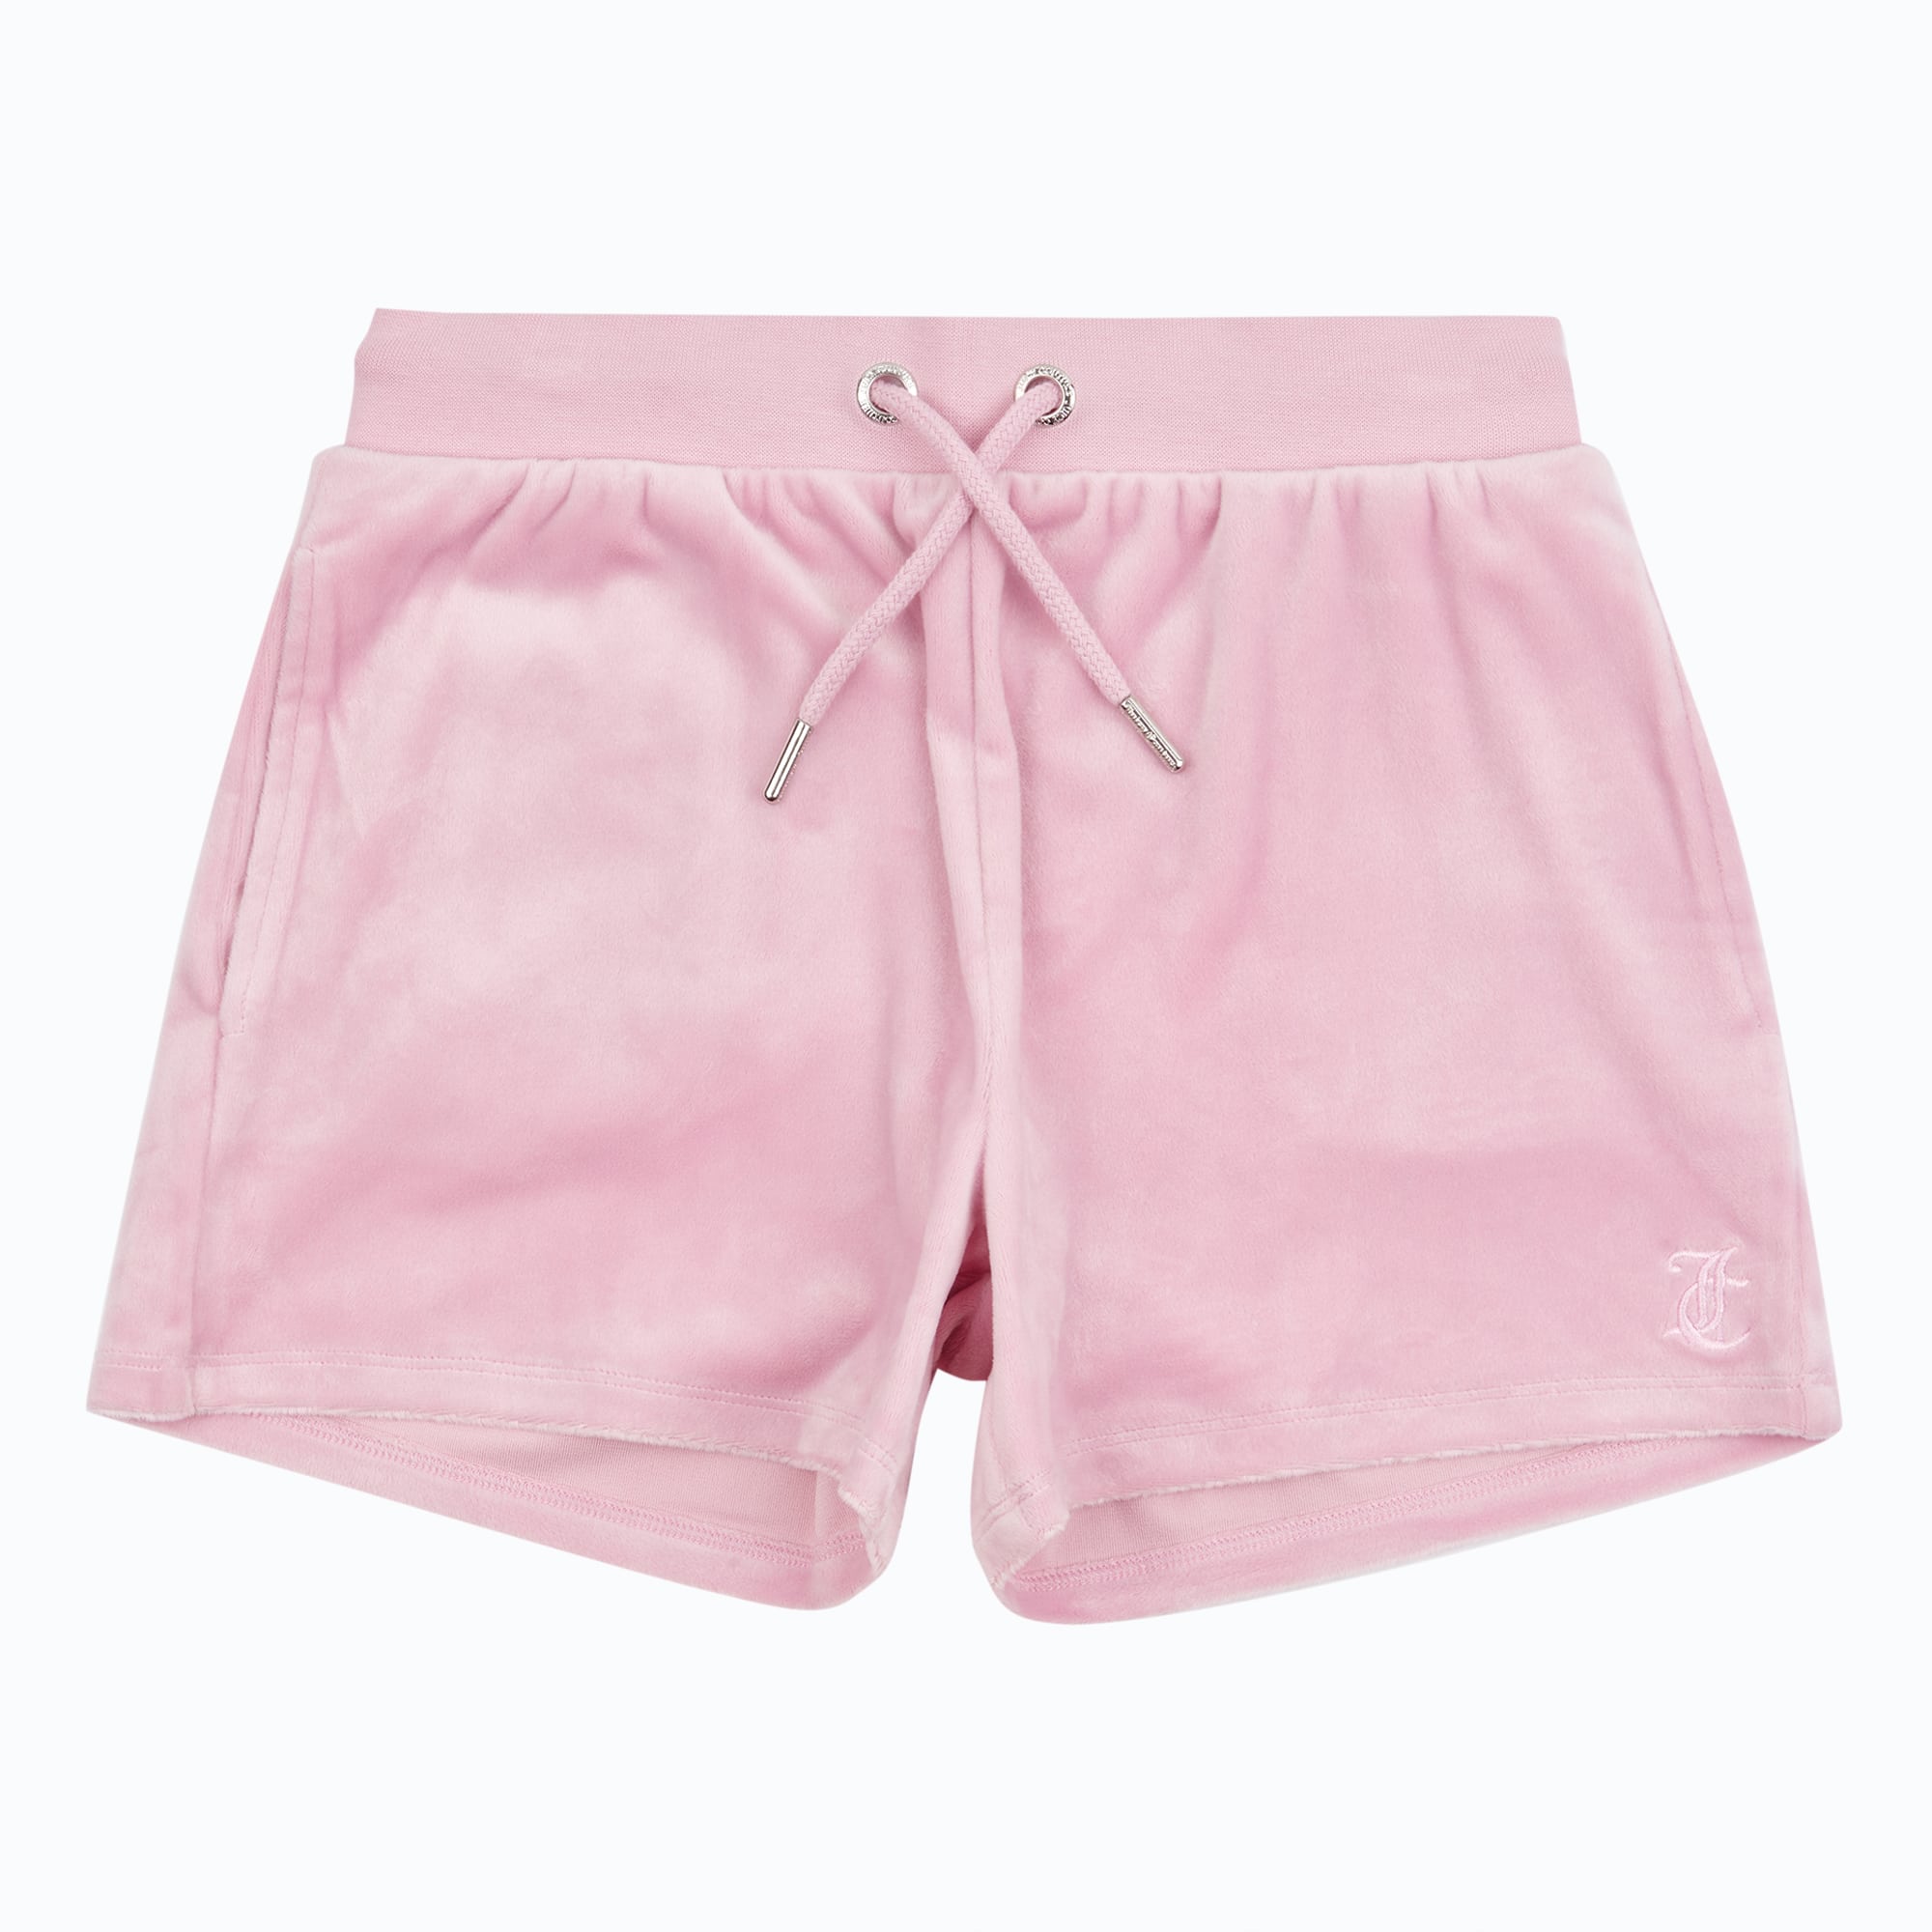 Juicy Couture pale pink velour shorts front view